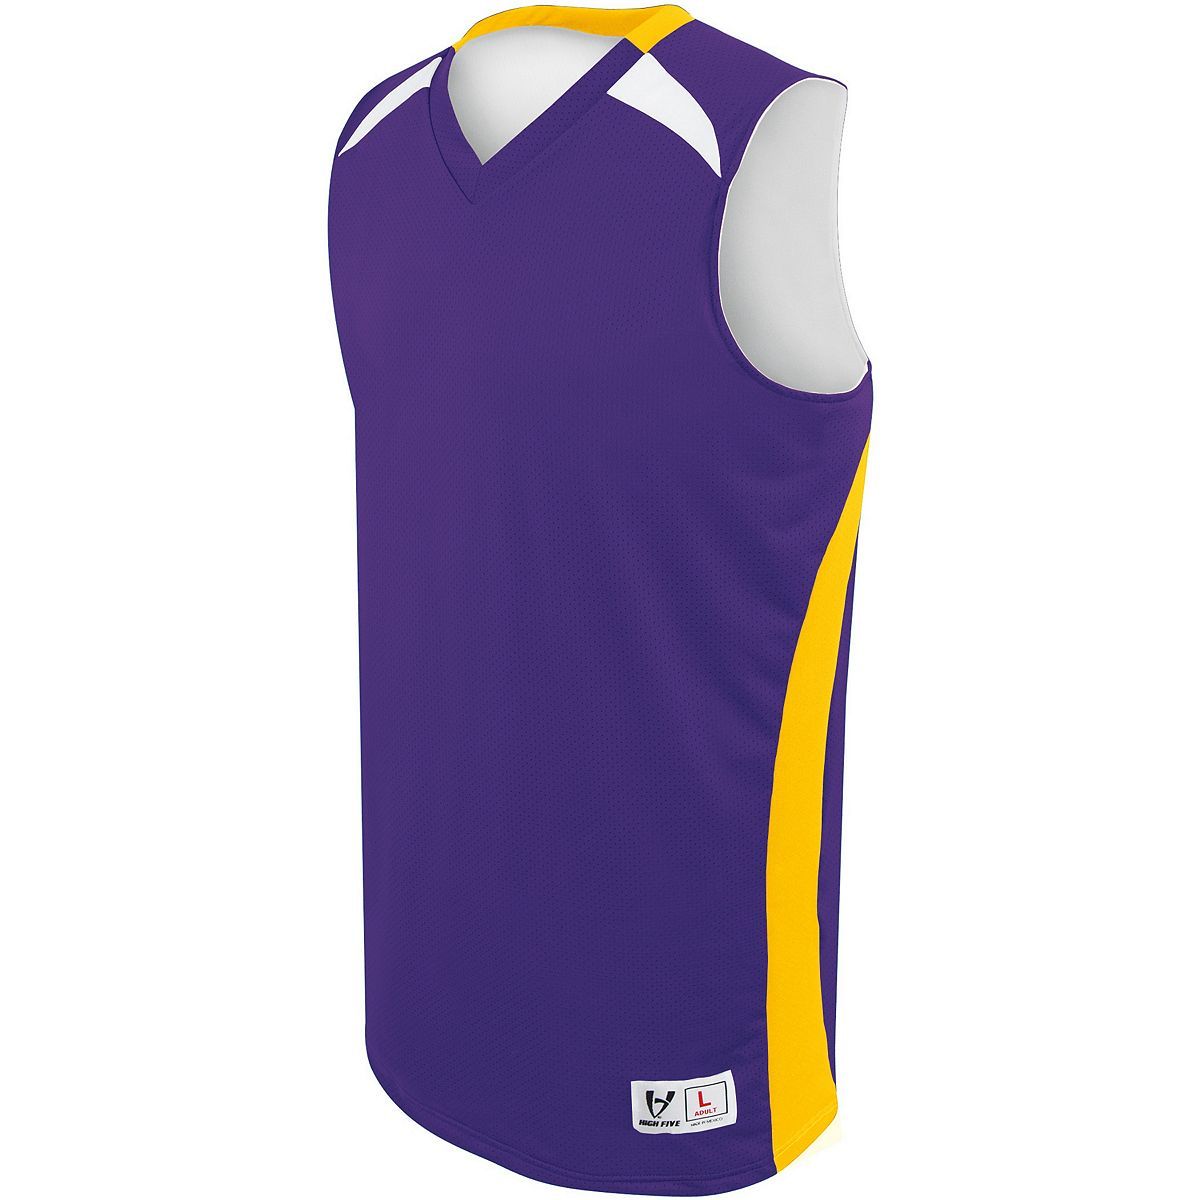 Holloway Campus Reversible Jersey in Purple/Athletic Gold/White  -Part of the Adult, Adult-Jersey, Basketball, Holloway, Shirts, All-Sports, All-Sports-1 product lines at KanaleyCreations.com